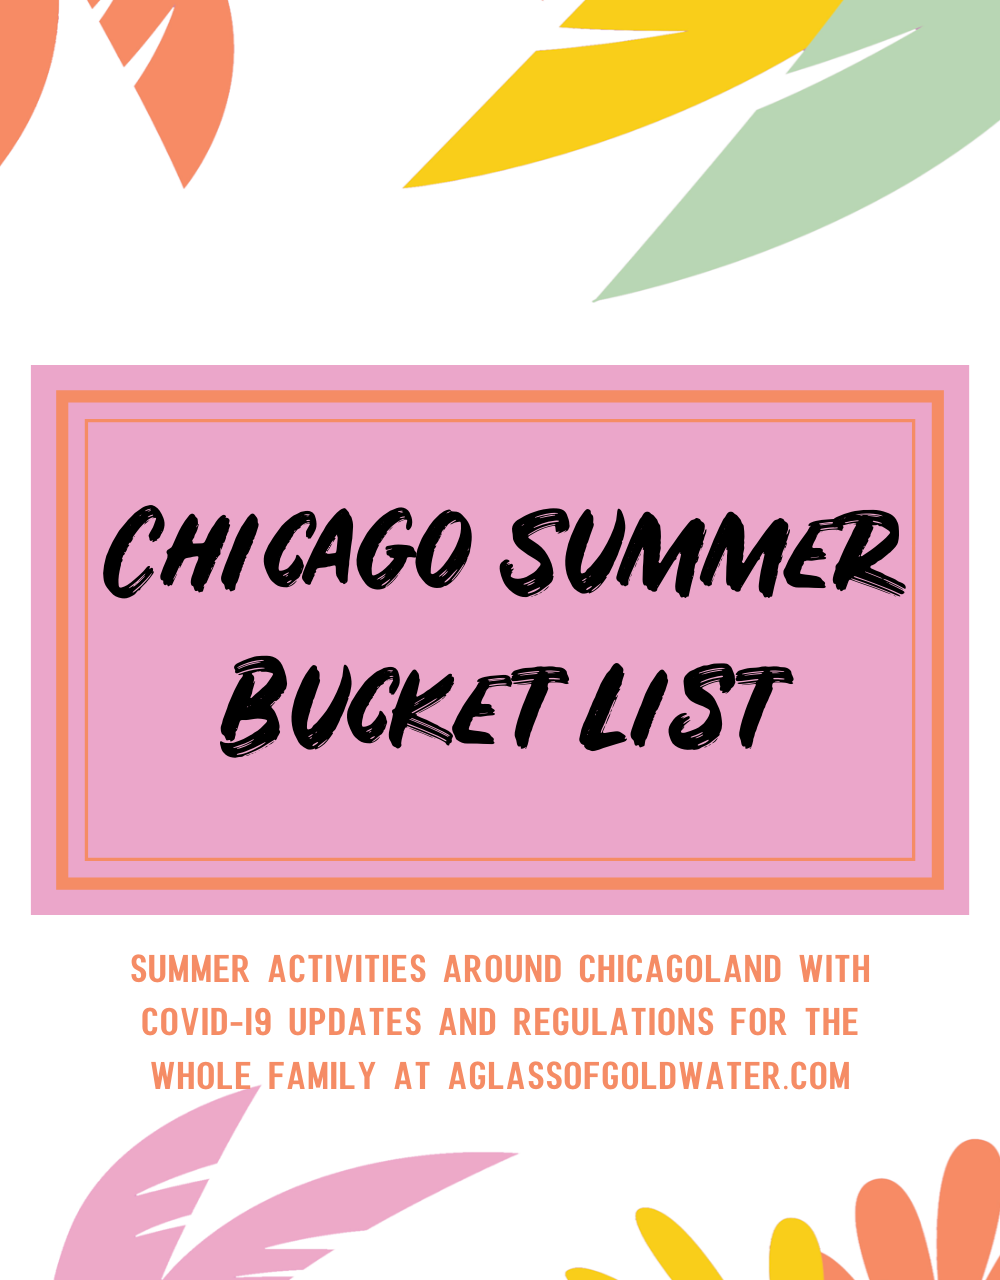 Your COVID Summer 2020 Must-Do Activities & Must-See Locations in the Chicagoland Area